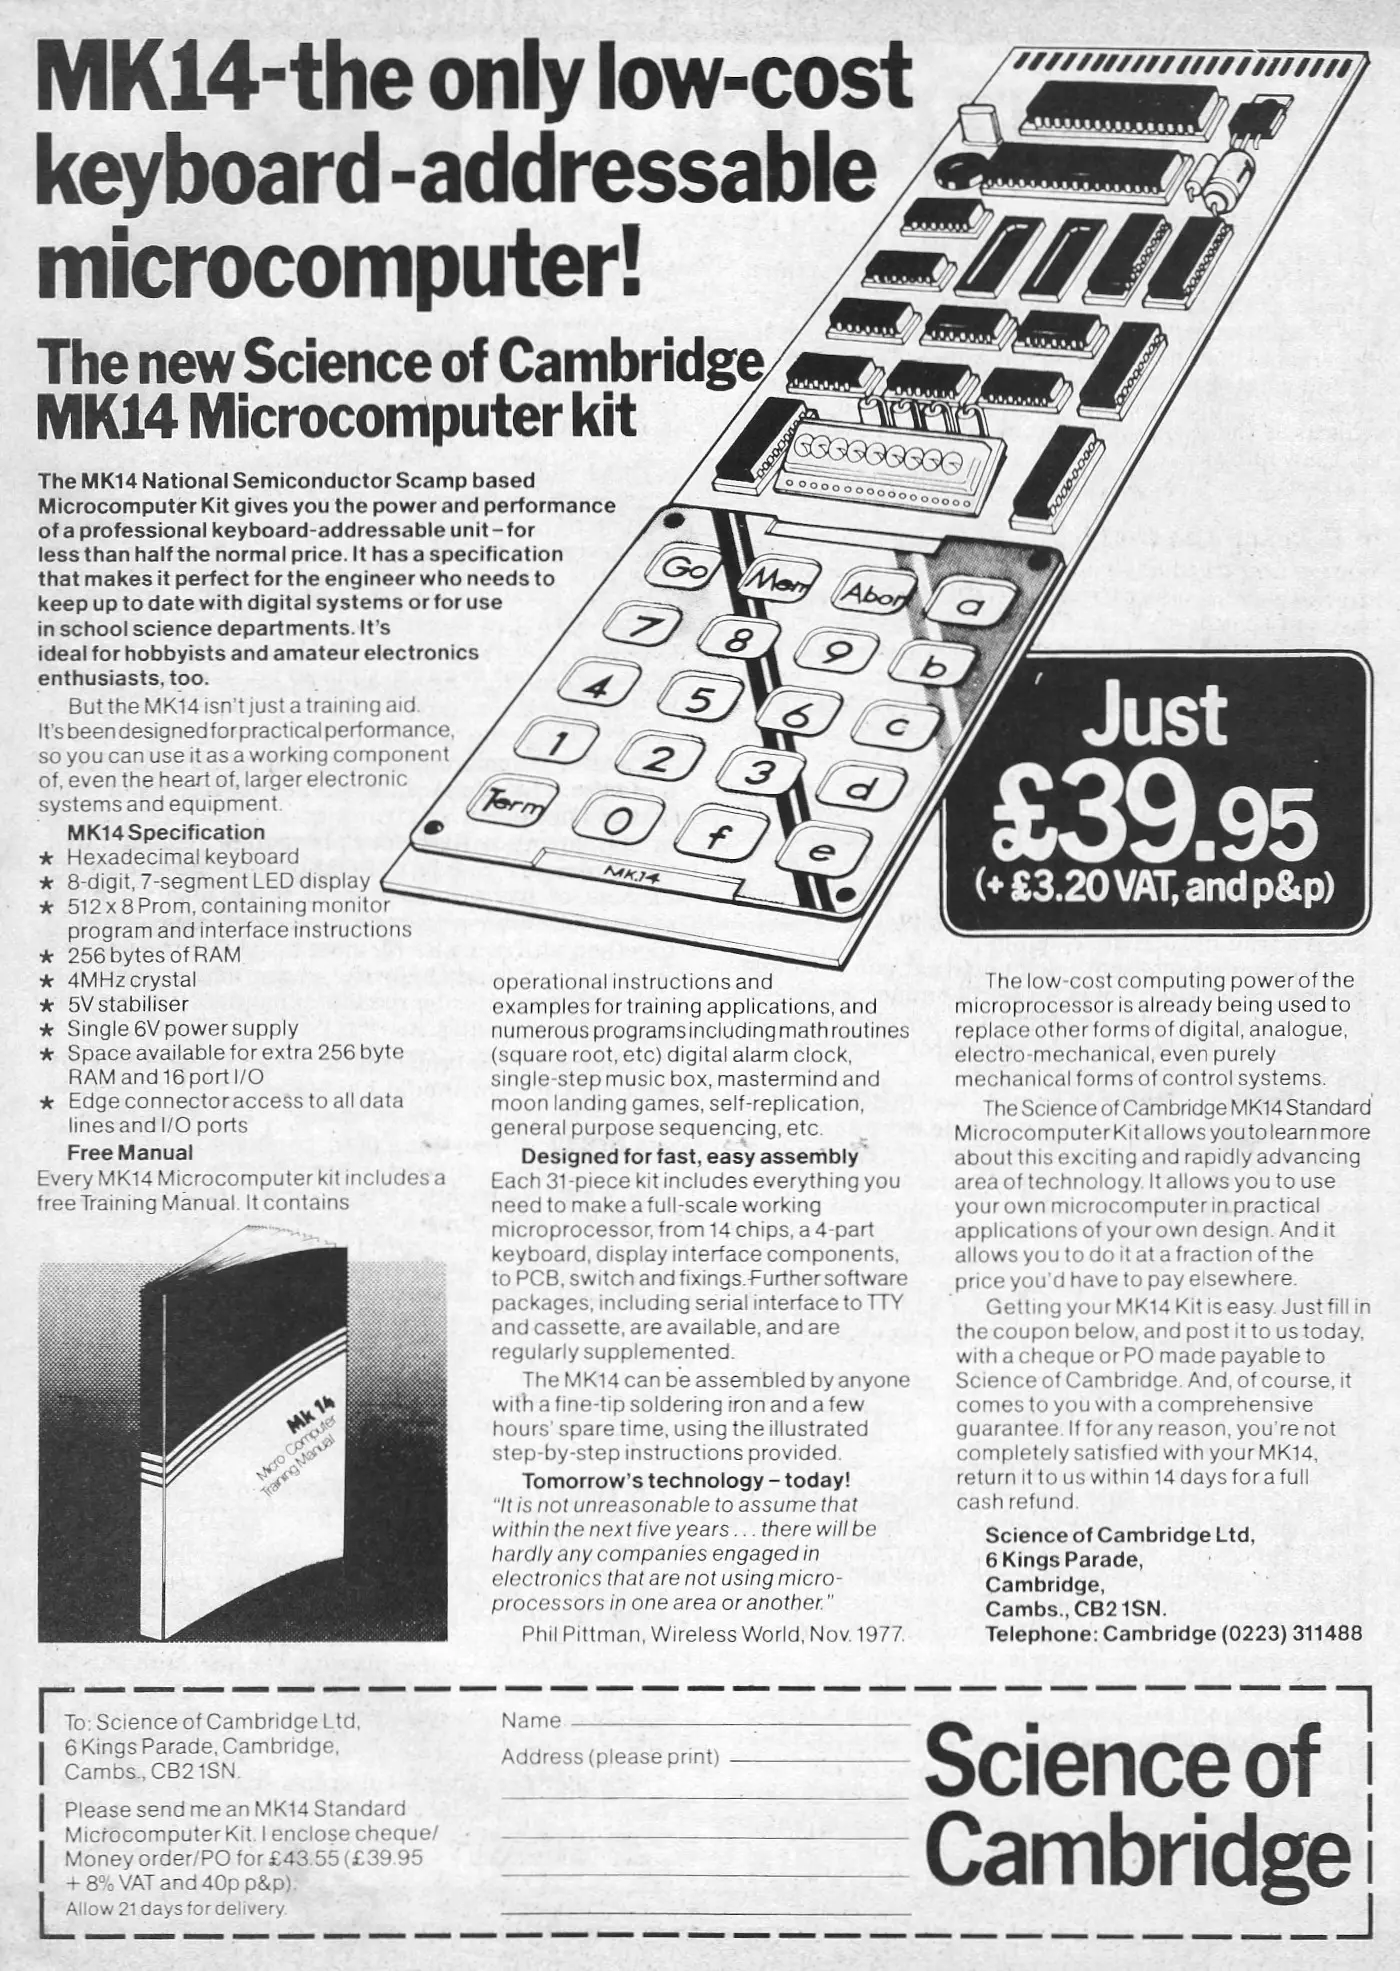 Sinclair Advert: MK14 - the only low-cost keyboard-addressable microcomputer!, from Electronics Today, June 1978